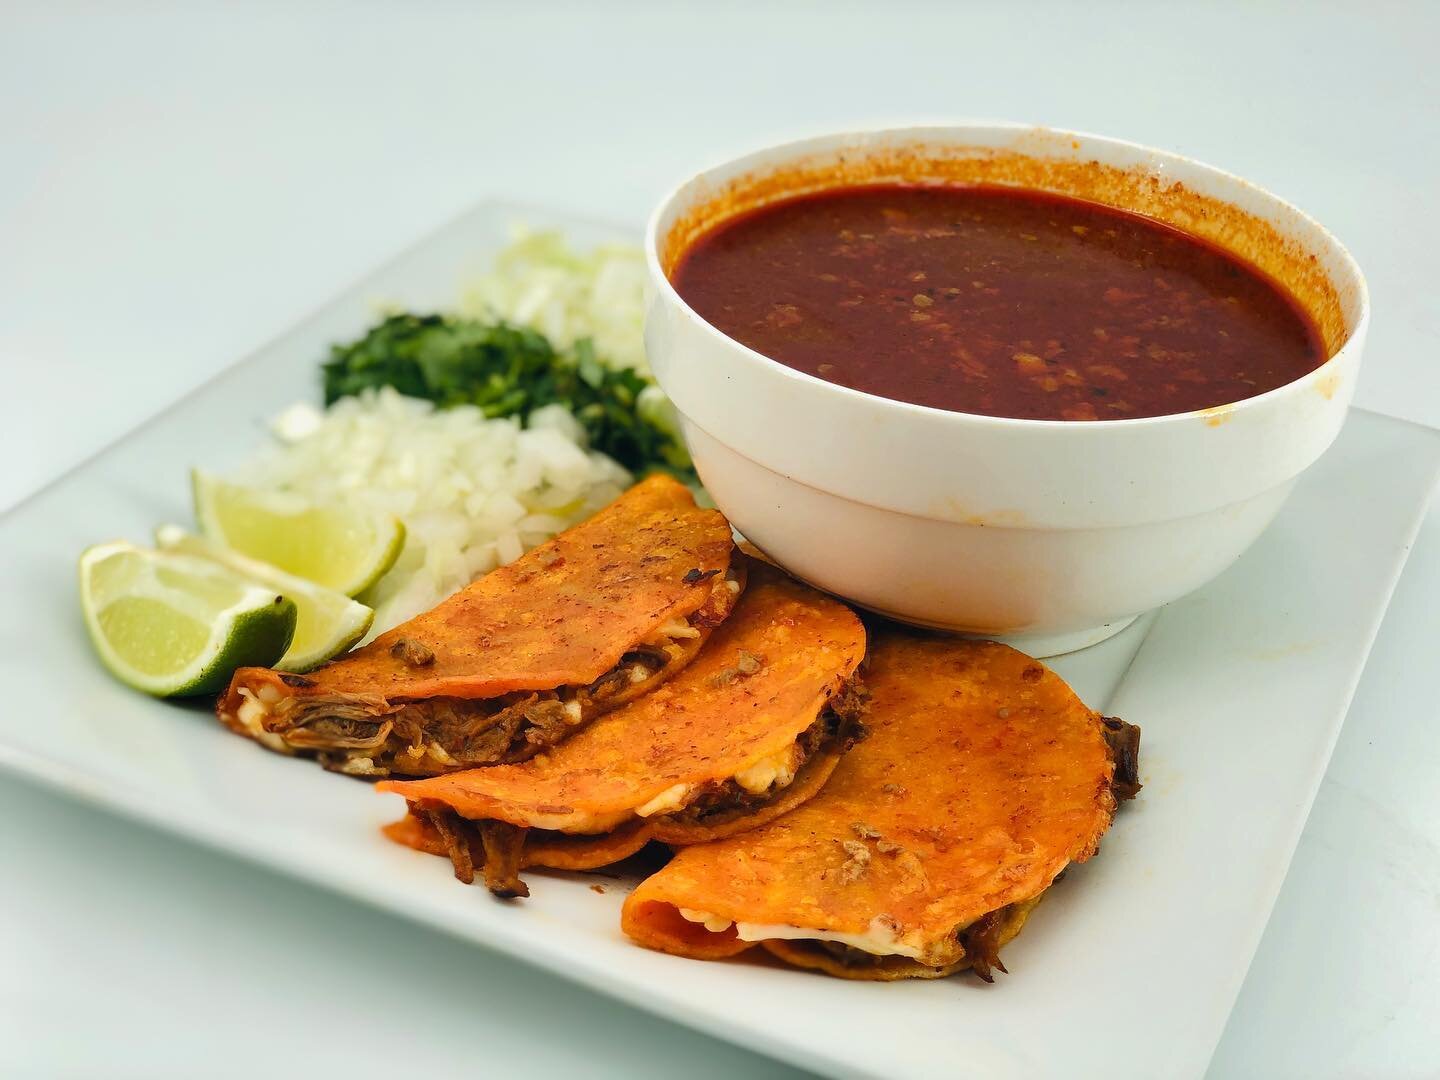 Come Try Our Quesabirria!!
Three Small Quesadillas Stuffed With Shredded Beef And Sided With Birria Soup To Use As A Dip!!
Dine-in or Takeout is available! 
Call us at (520)748-1032!